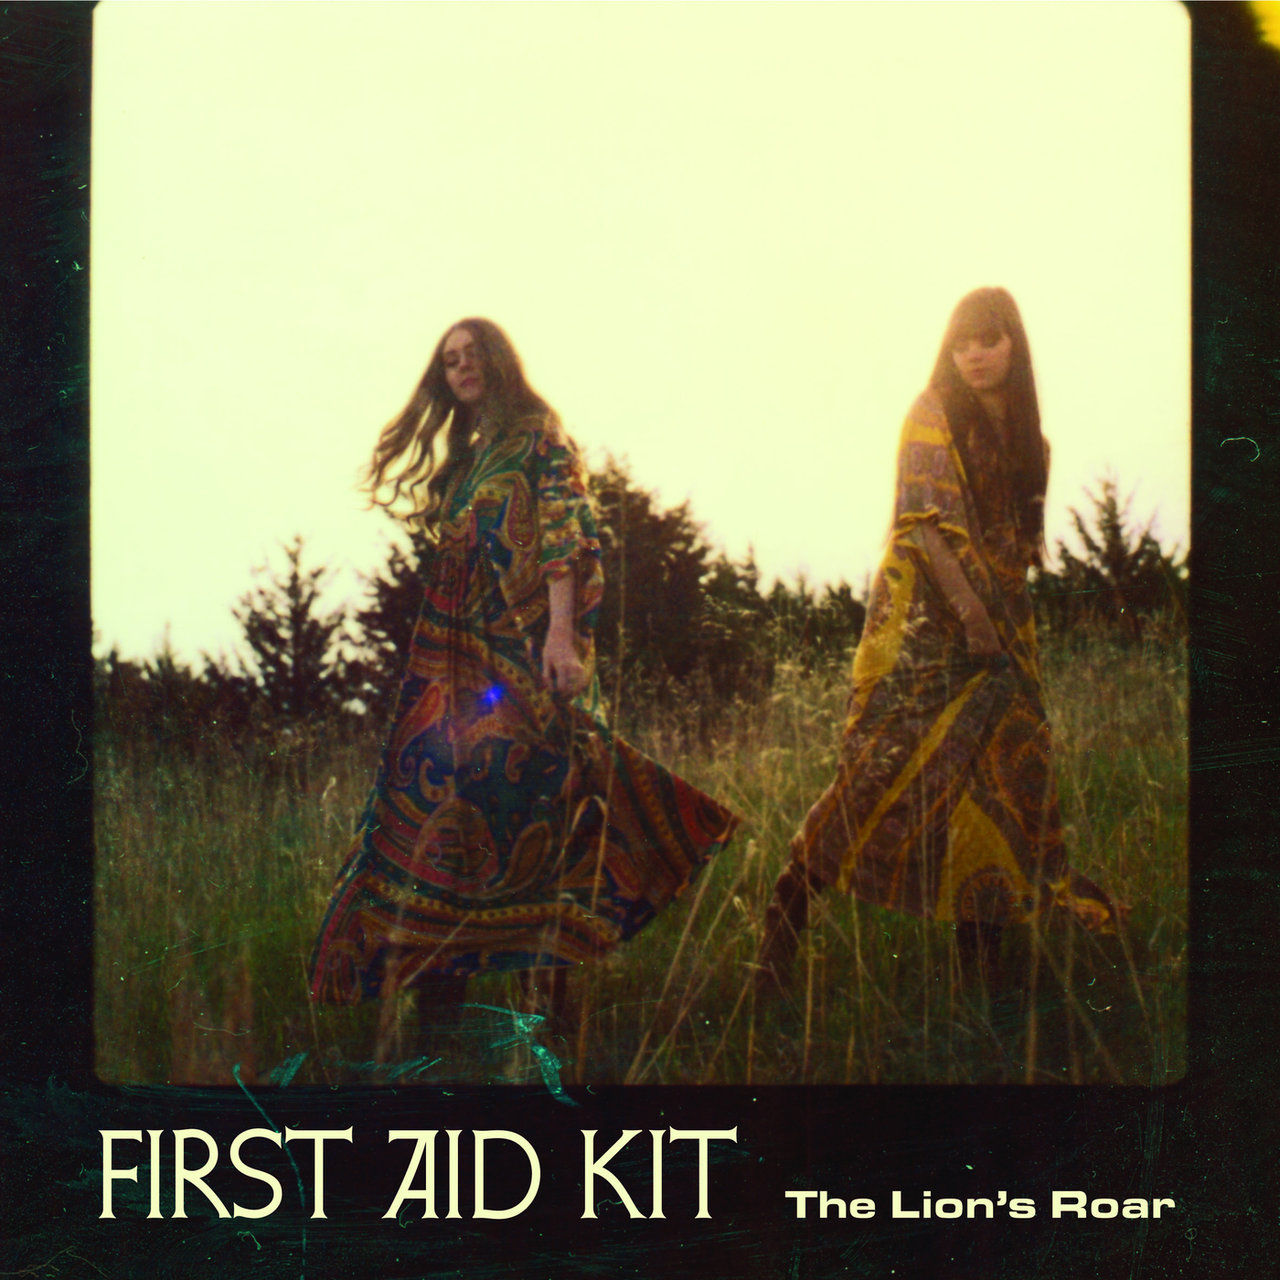 First Aid Kit - The Lion's Roar [2012]